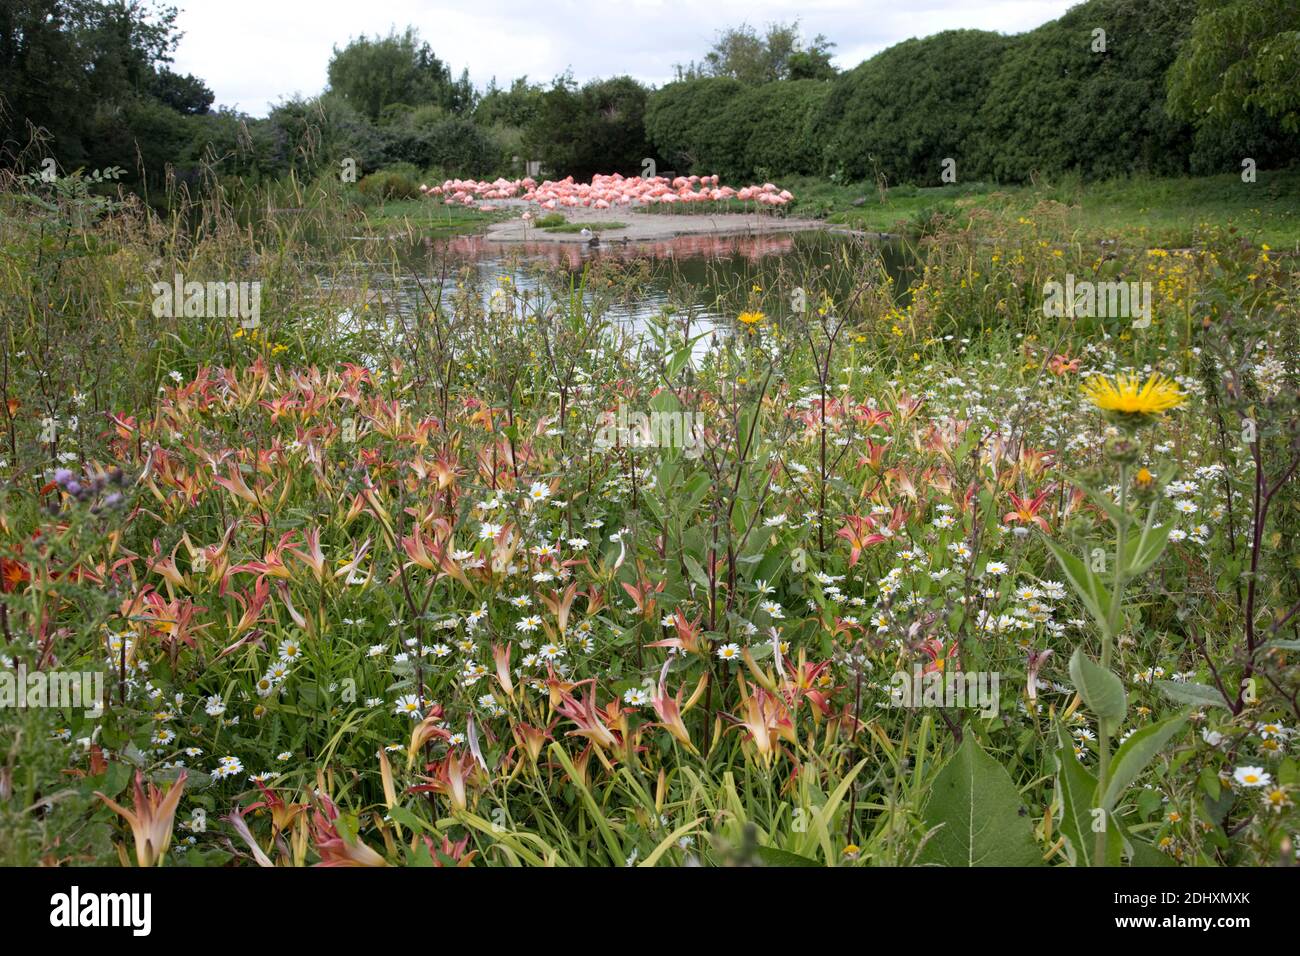 Wildflowers in bloom in front of Caribbean flamingo enclosure by Slimbridge cafe Wildfowl Trust UK Stock Photo